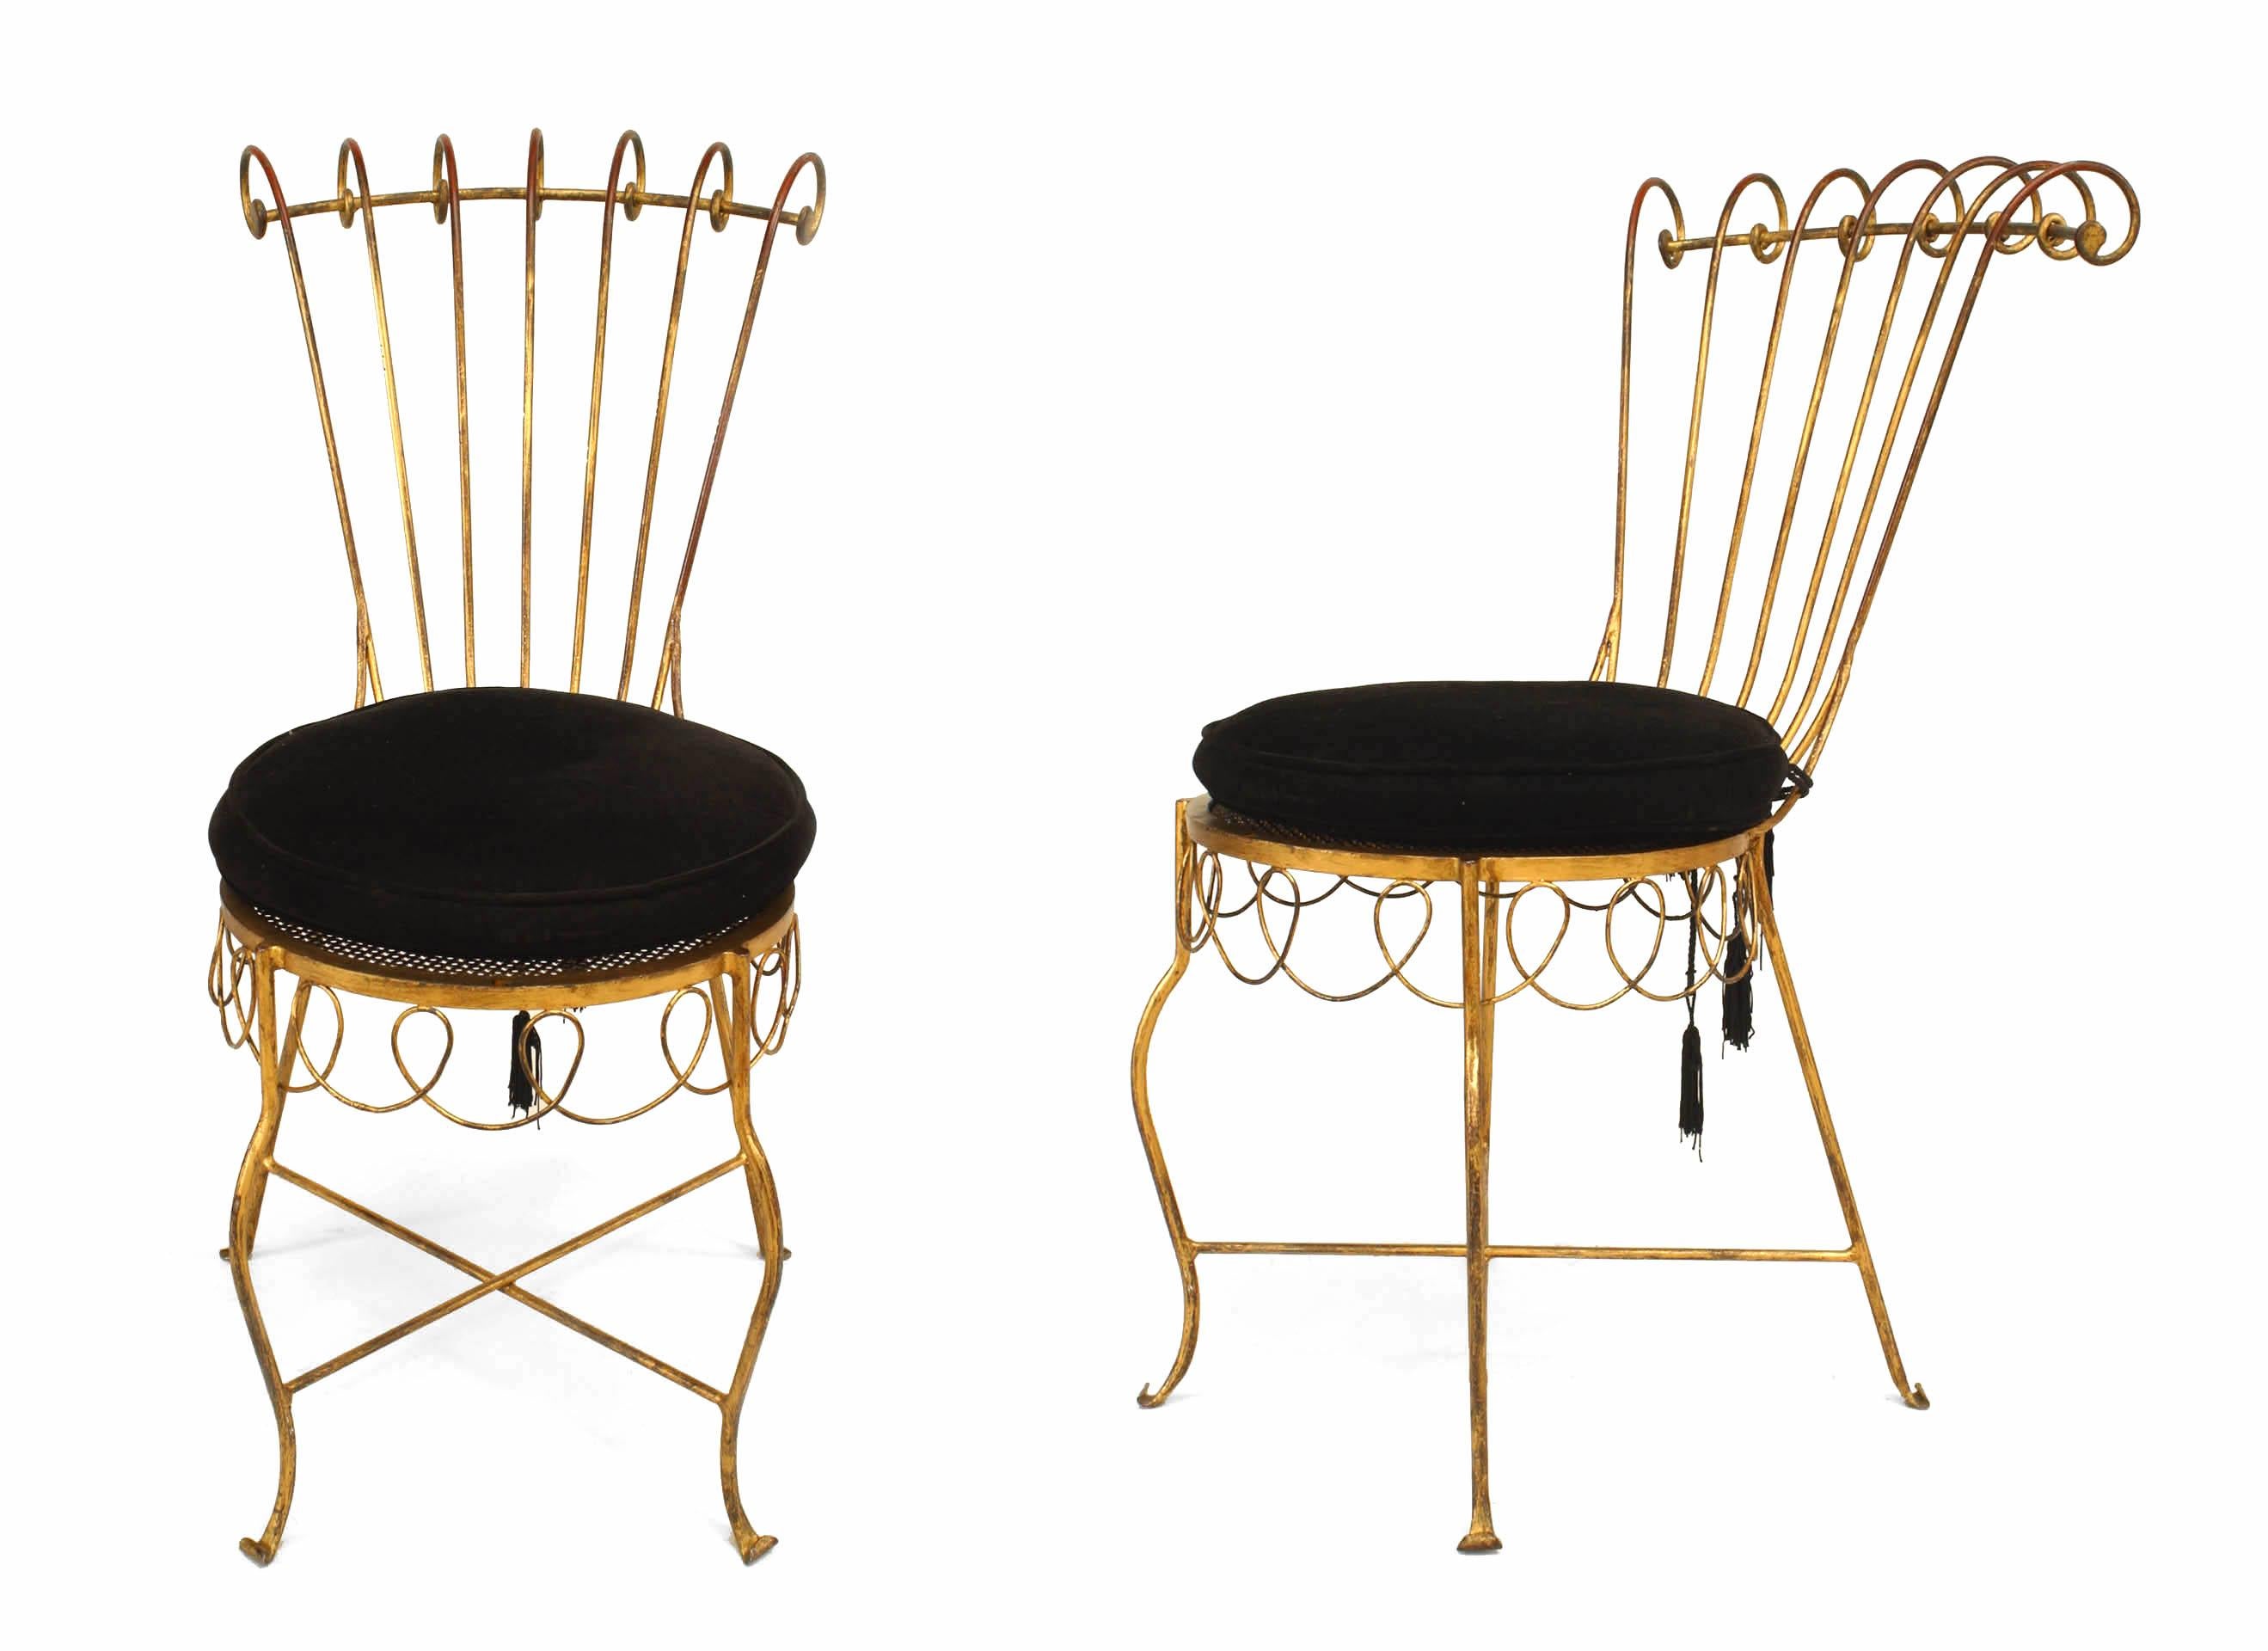 Pair of French 1940s gilt metal side chairs with open scroll design back and woven apron under seat with a stretcher.
